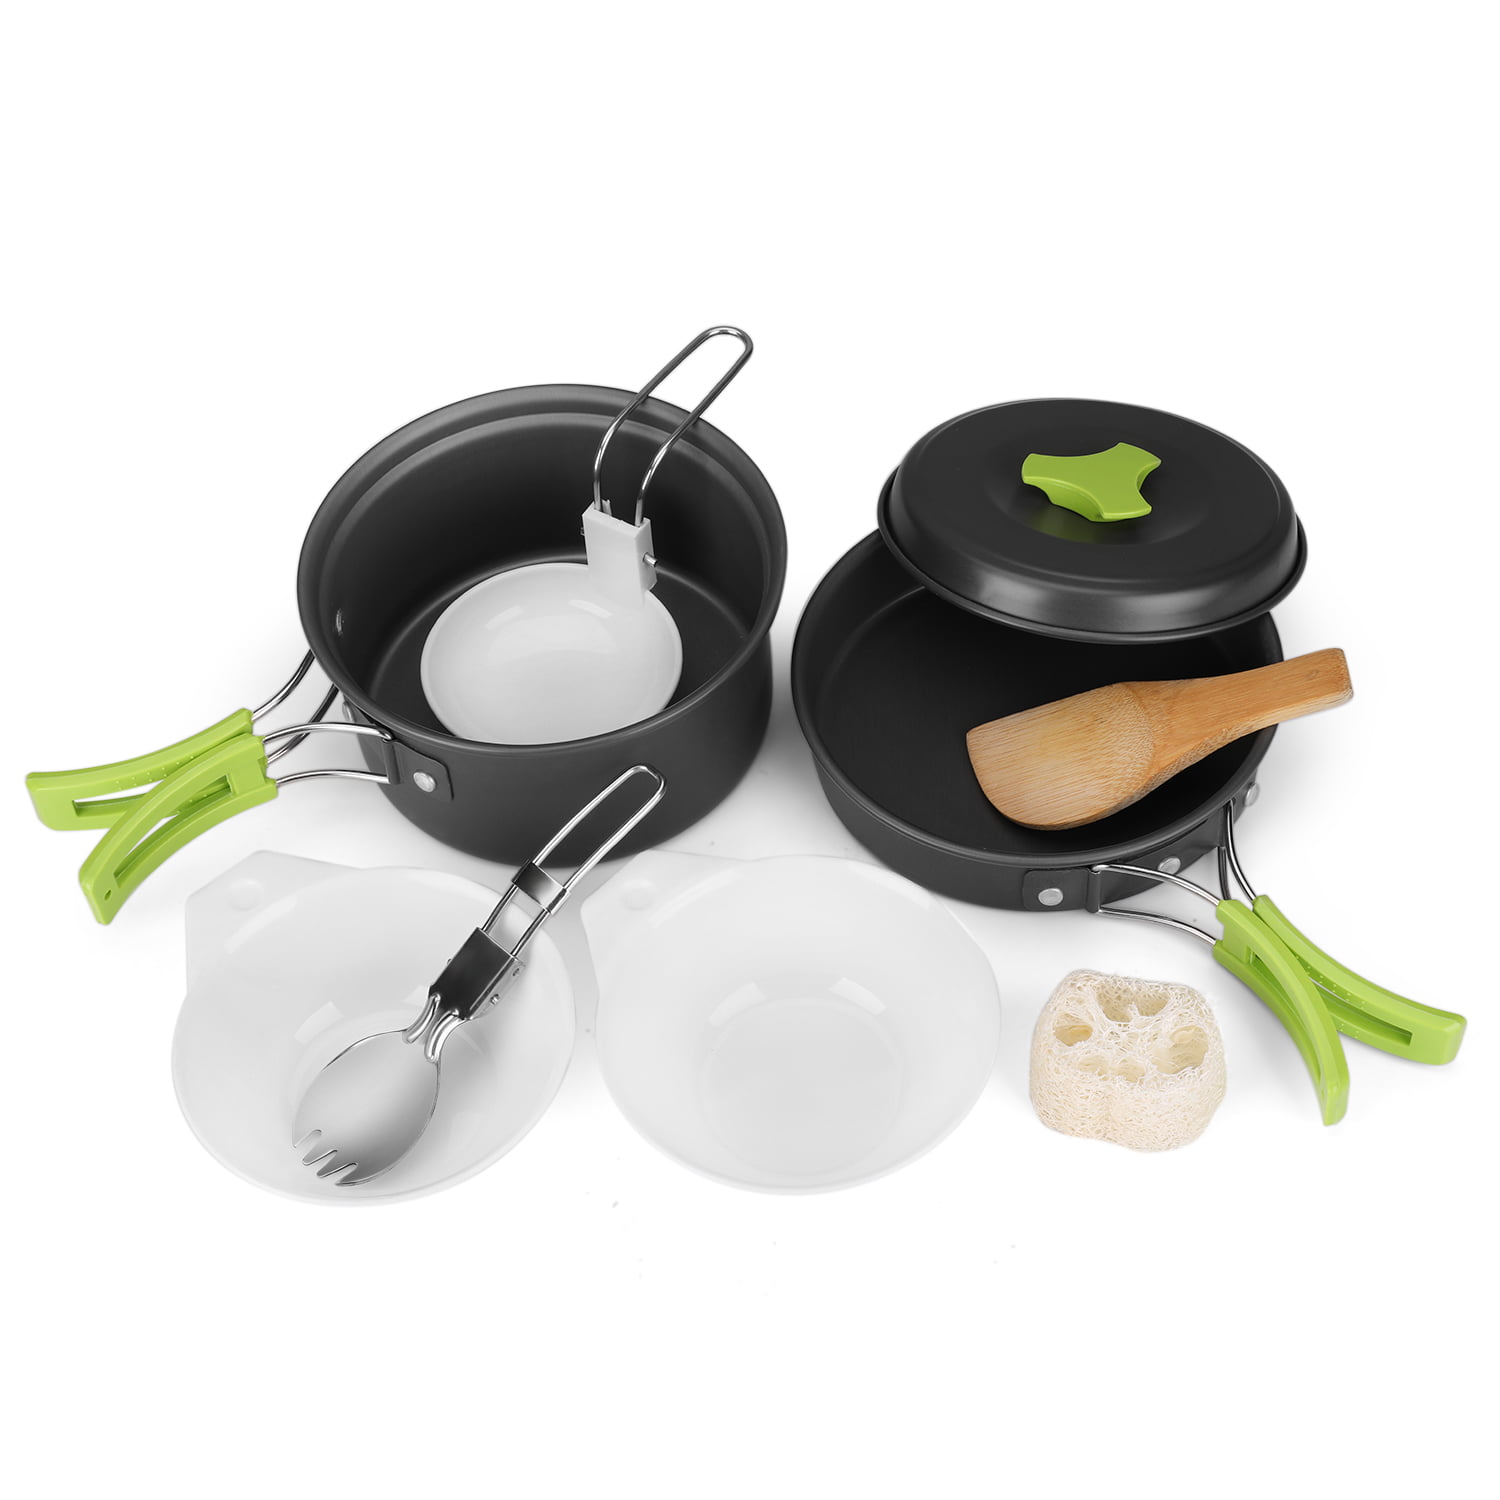 Pots and Pans Set Nonstick - YIIFEEO Stackable Camping Cookware Pots and  Pans Set Detachable Handle Kitchen Cookware Sets Removable Handle, Non  Toxic